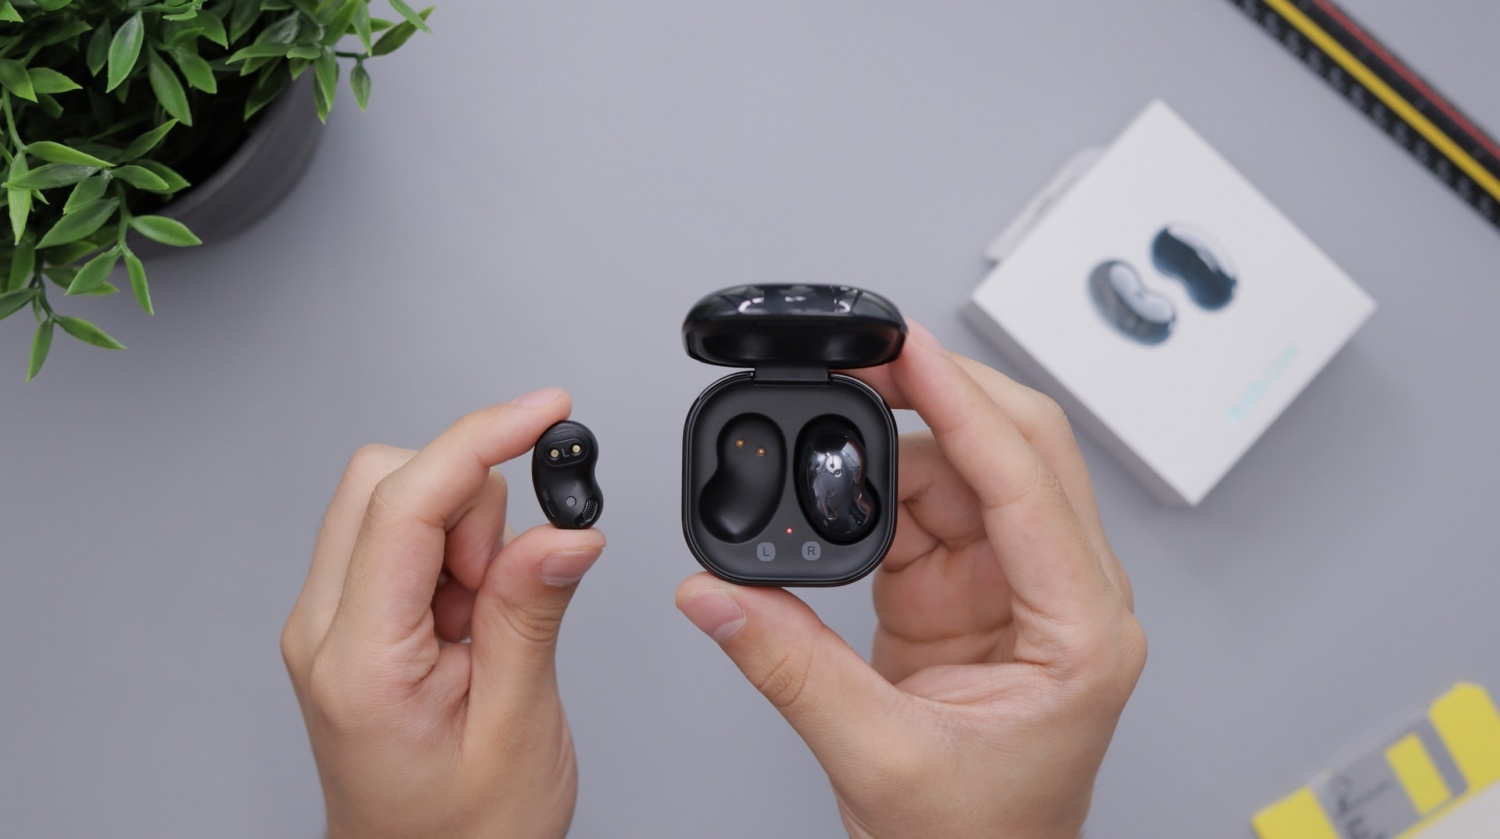 Samsung Galaxy Buds Battery Life, Specs Teased; 5 New Colors Also Leaked!